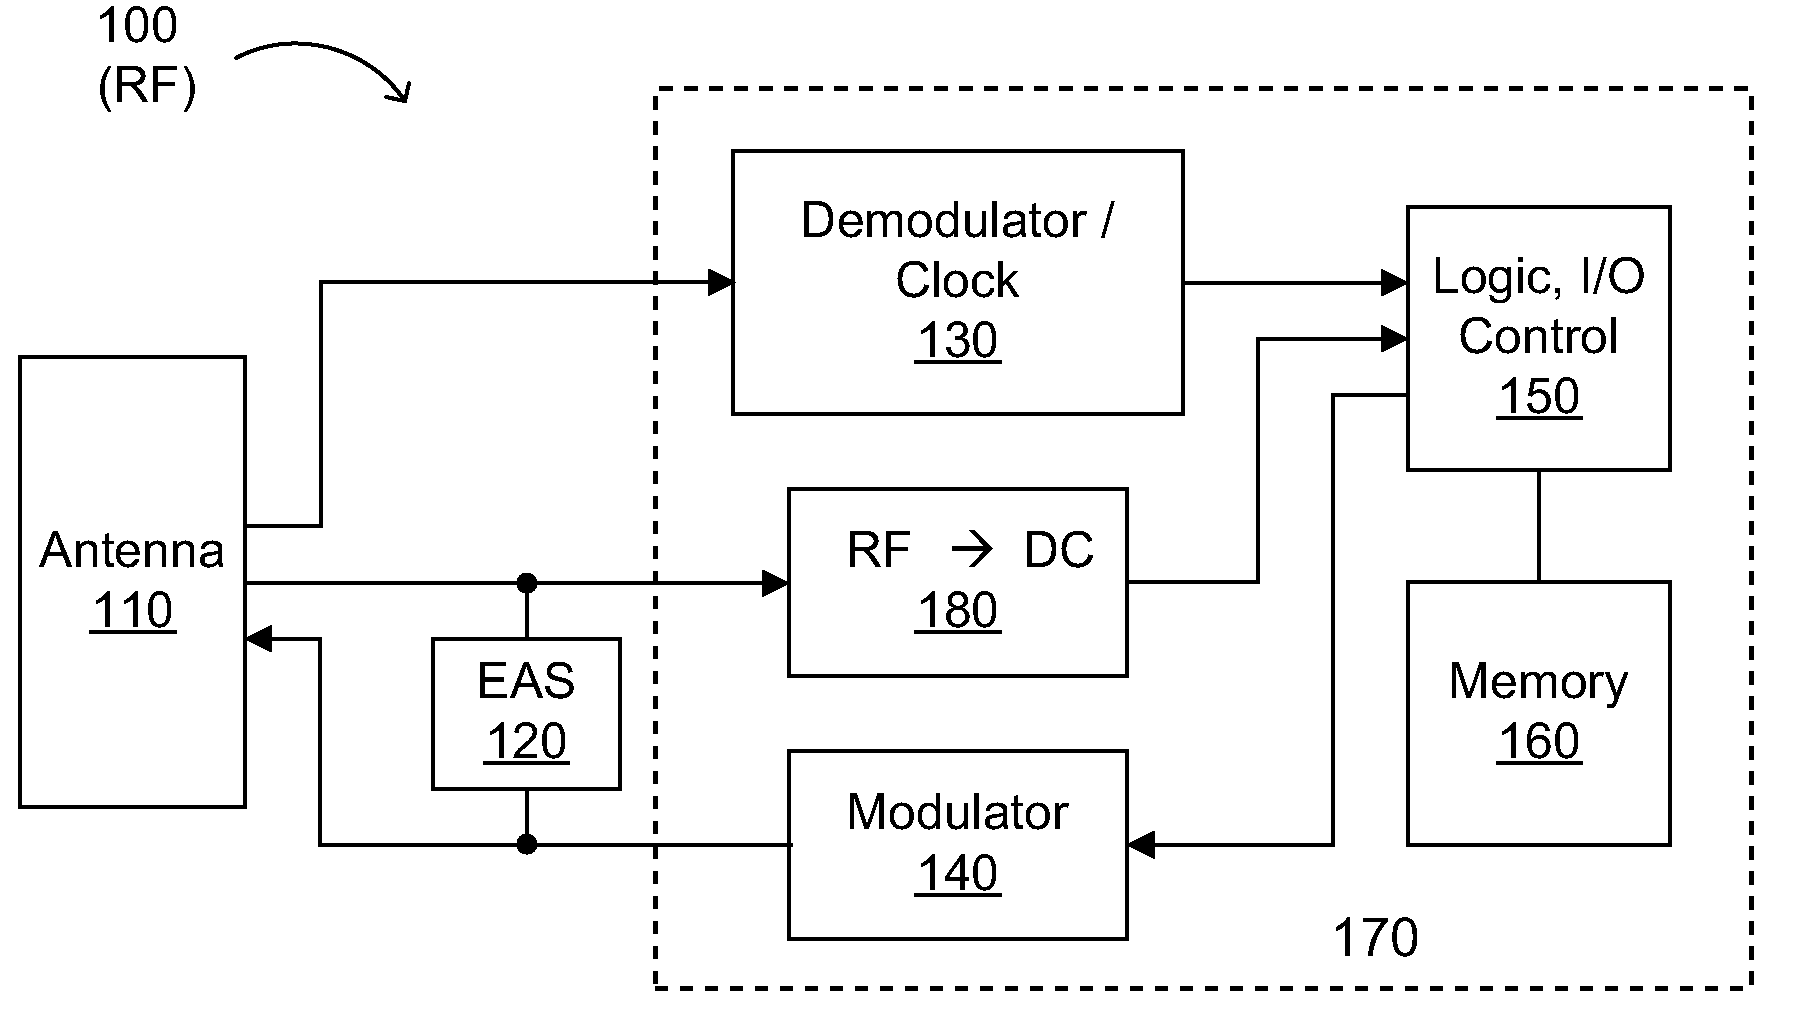 Multi-mode tags and methods of making and using the same